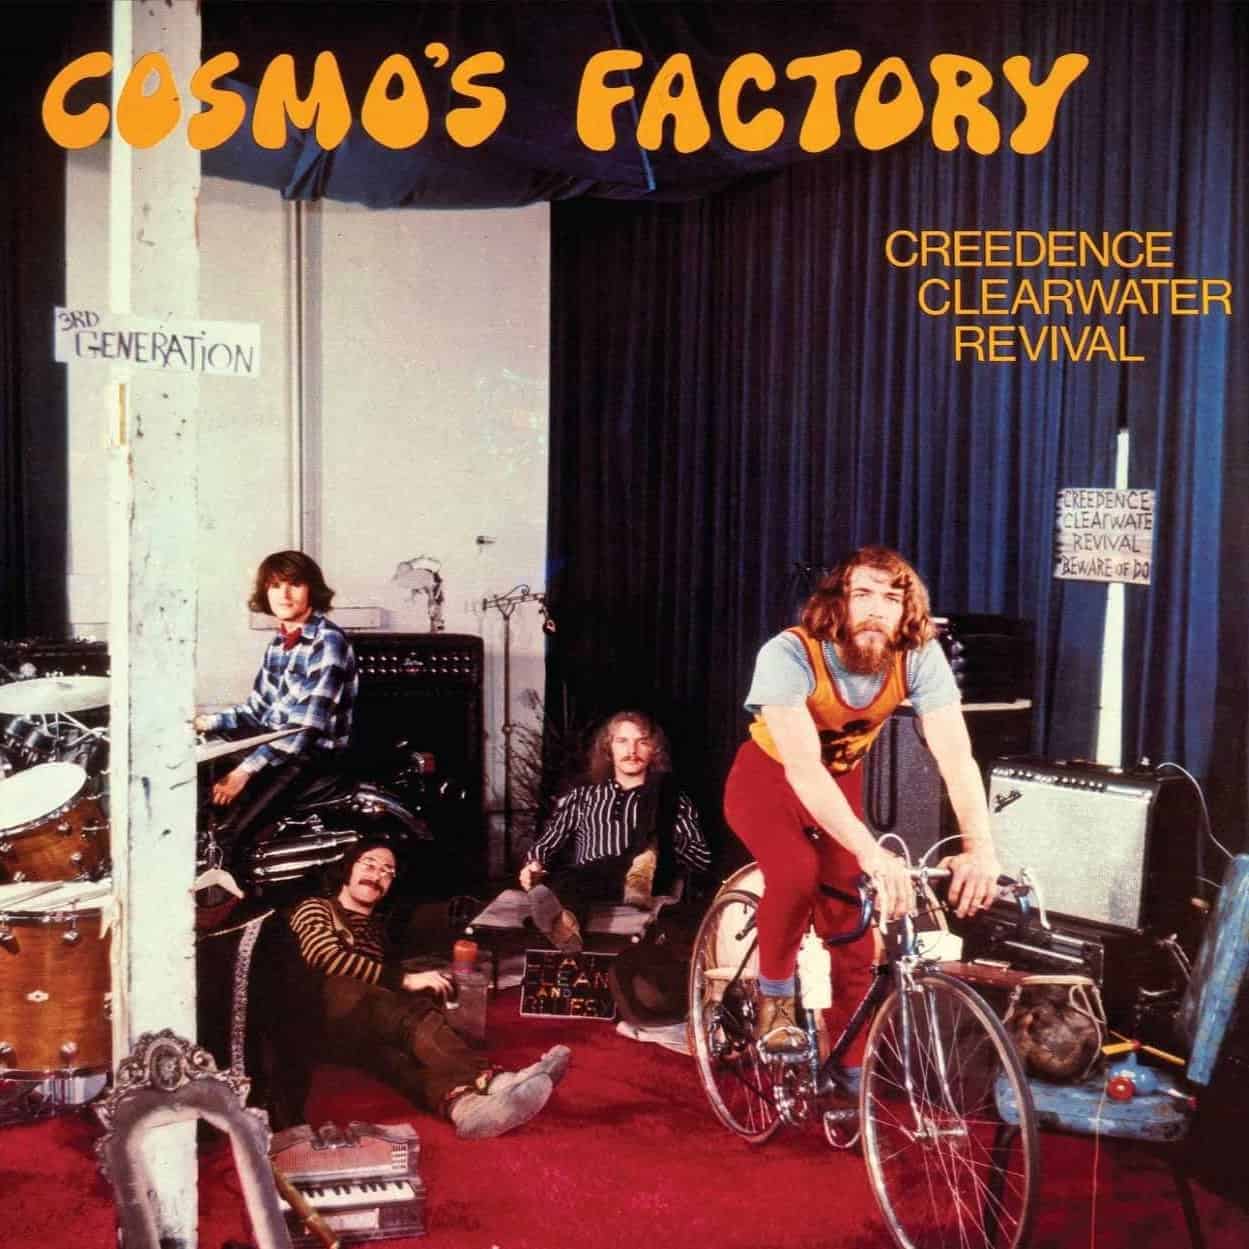 CREEDENCE CLEARWATER REVIVAL - COSMOS FACTORY